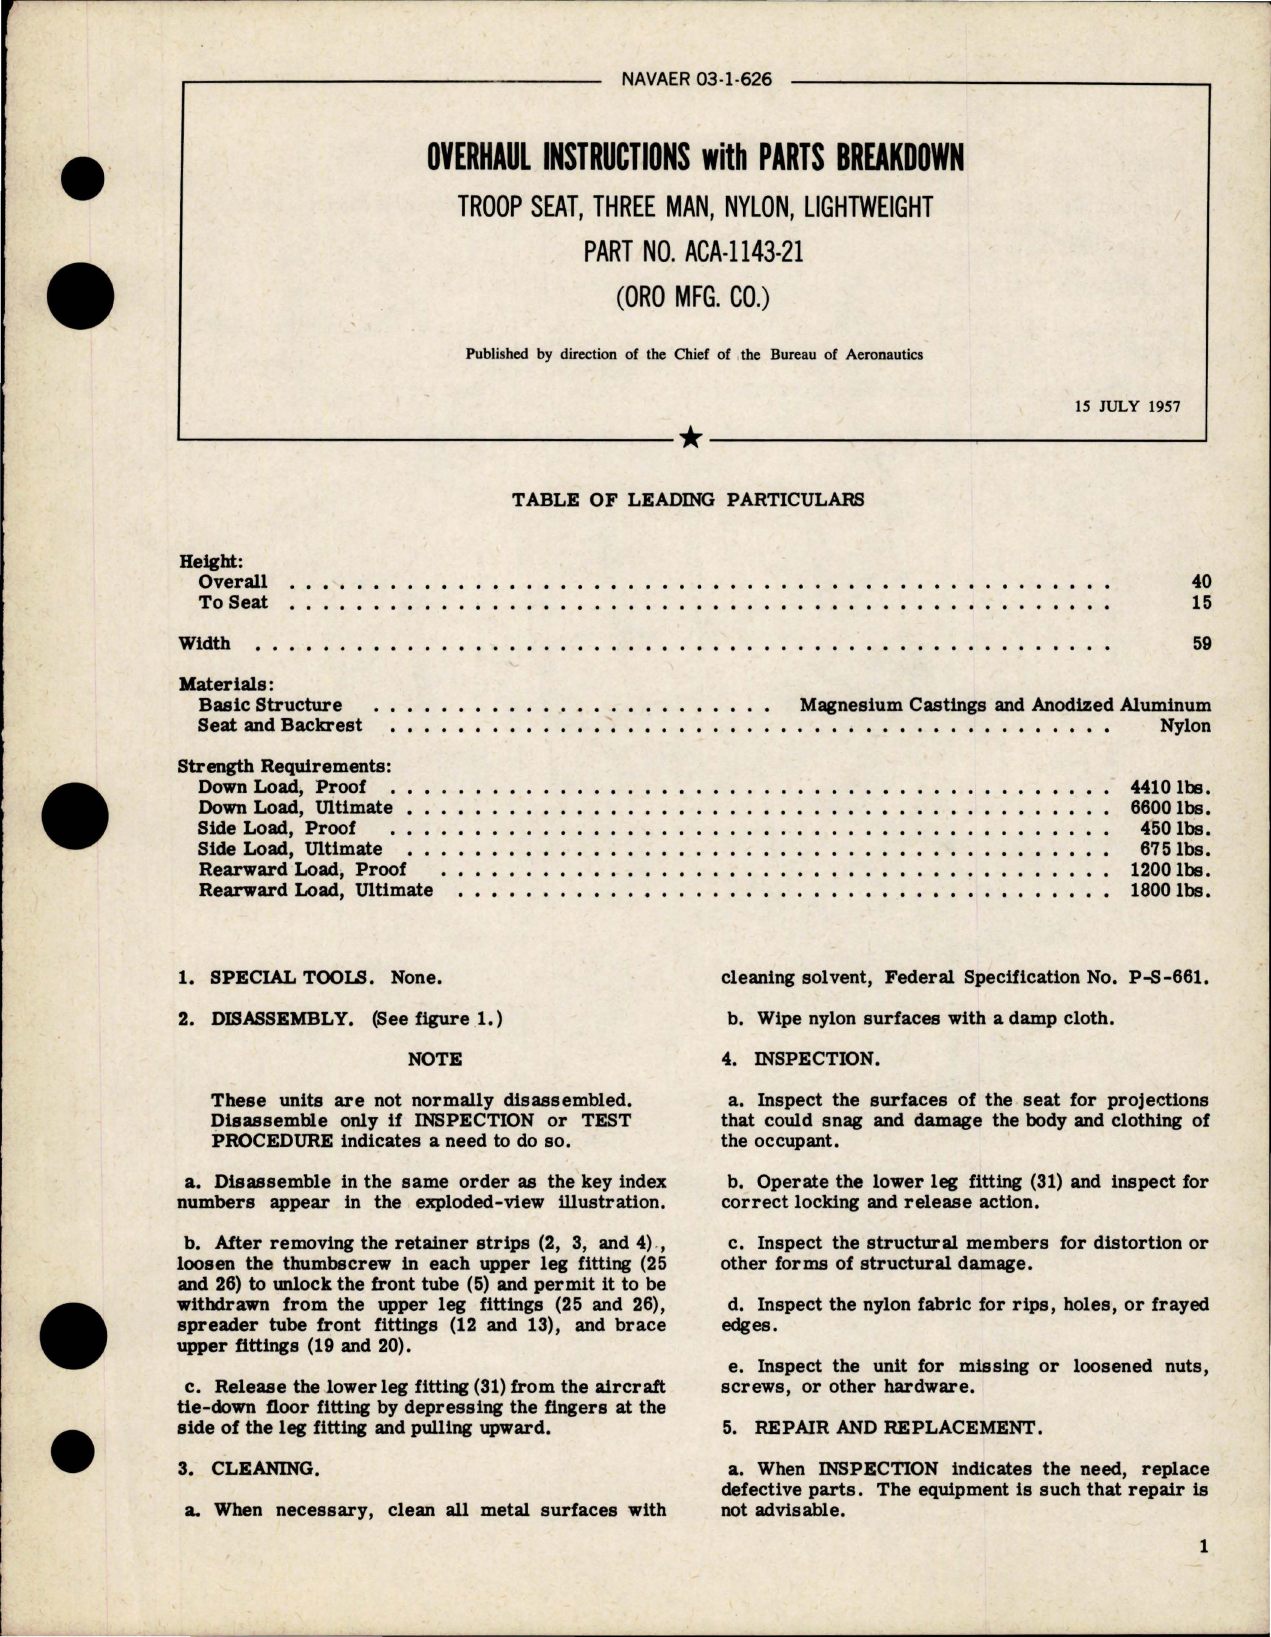 Sample page 1 from AirCorps Library document: Overhaul Instructions with Parts Breakdown for Three Man Lightweight Nylon Troop Seat - Part ACA-1143-21 